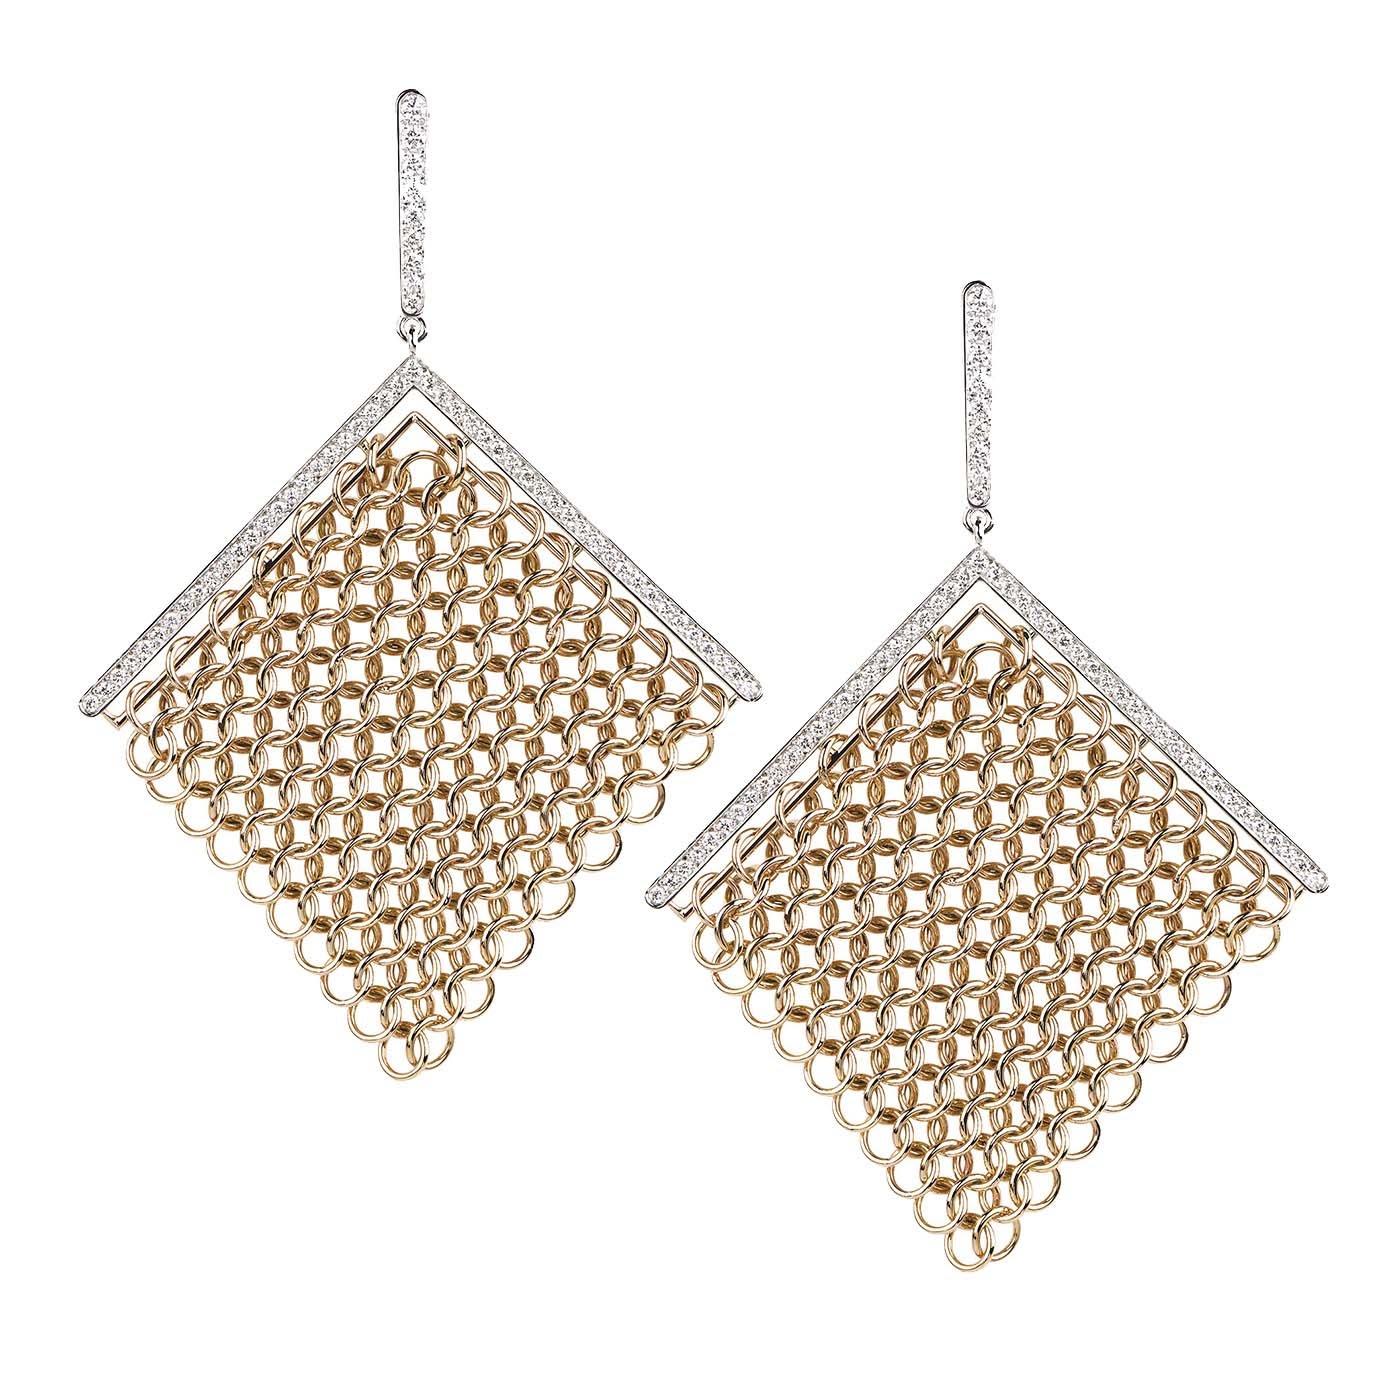 Trama White/Pink Gold and Diamond Square Earrings - Castrovilli